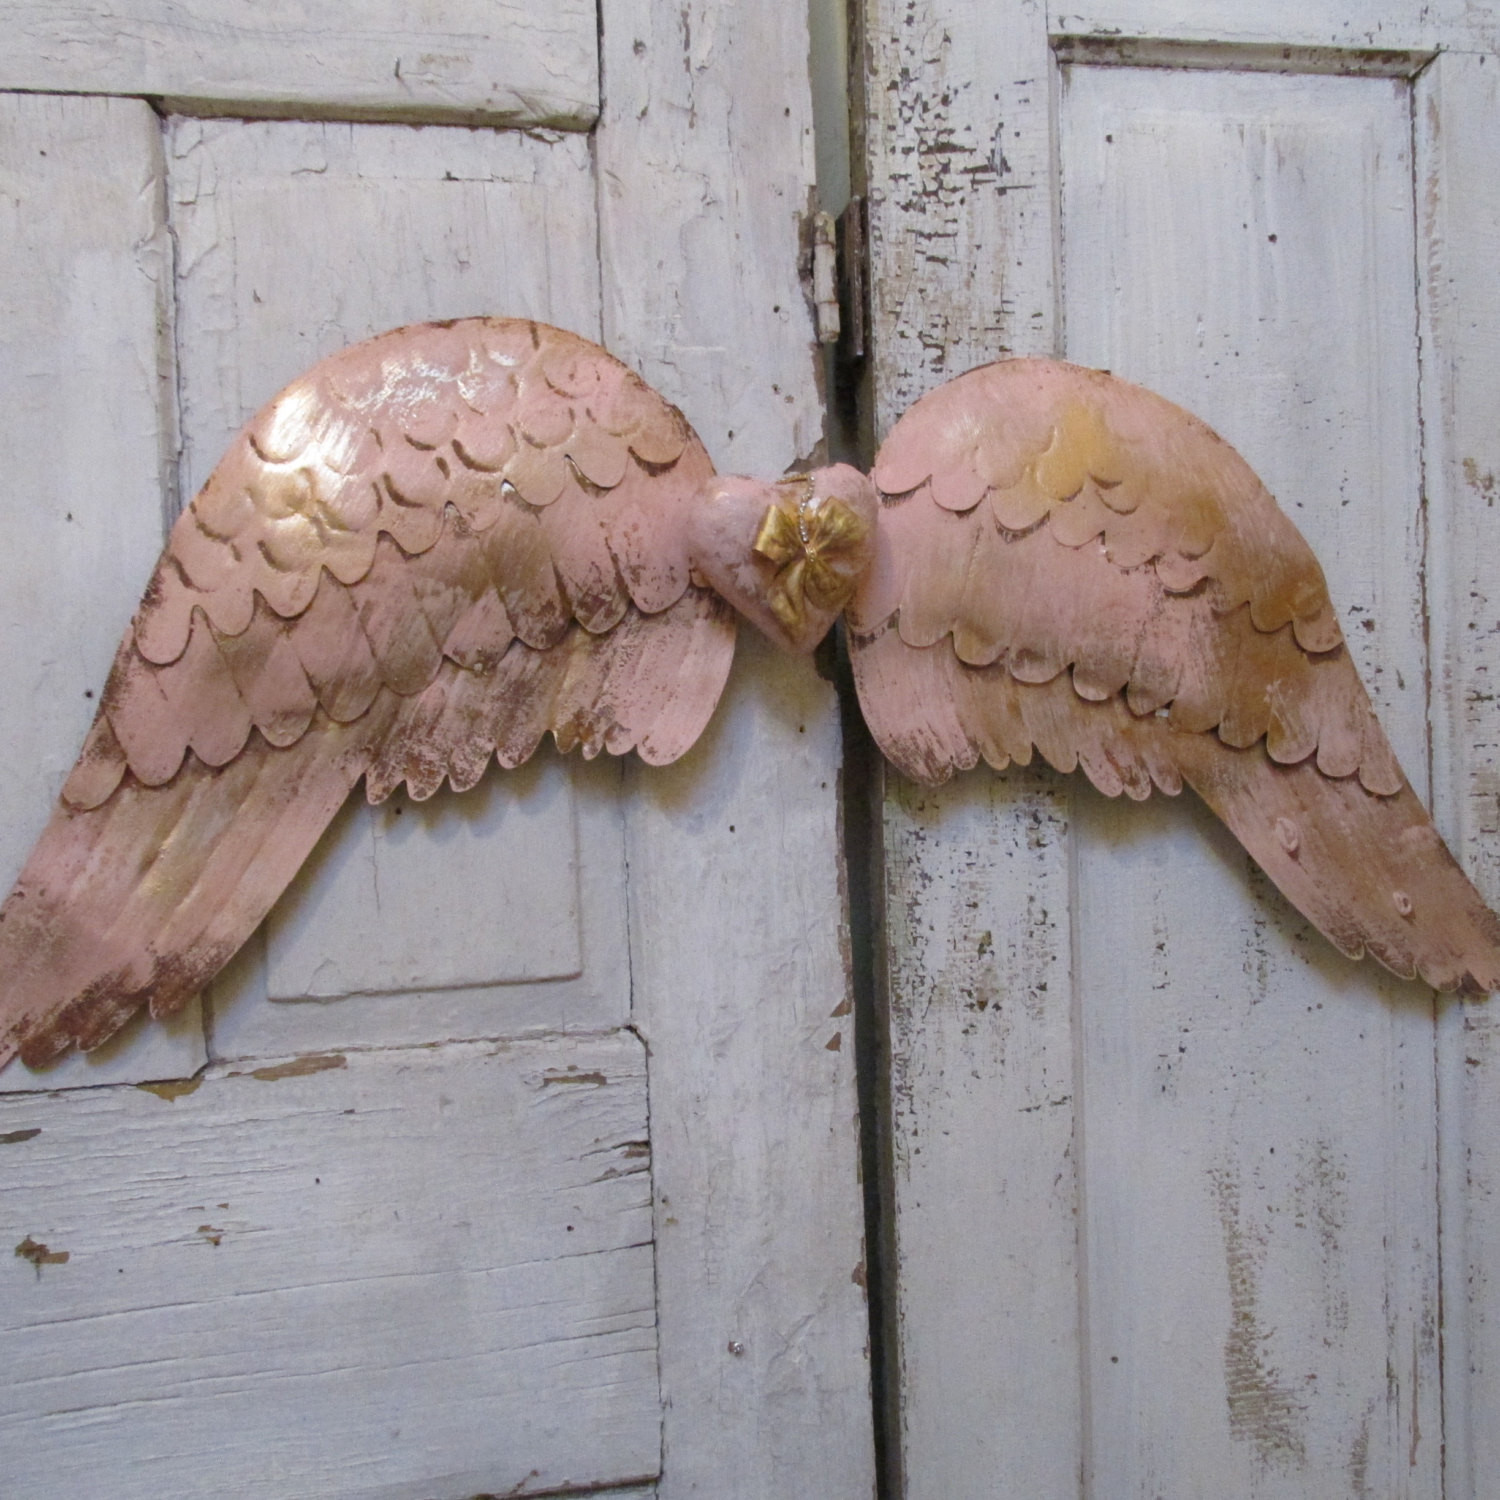 DIY Angel Wings Wall Decor
 Pink metal tin angel wings wall decor with centerpiece